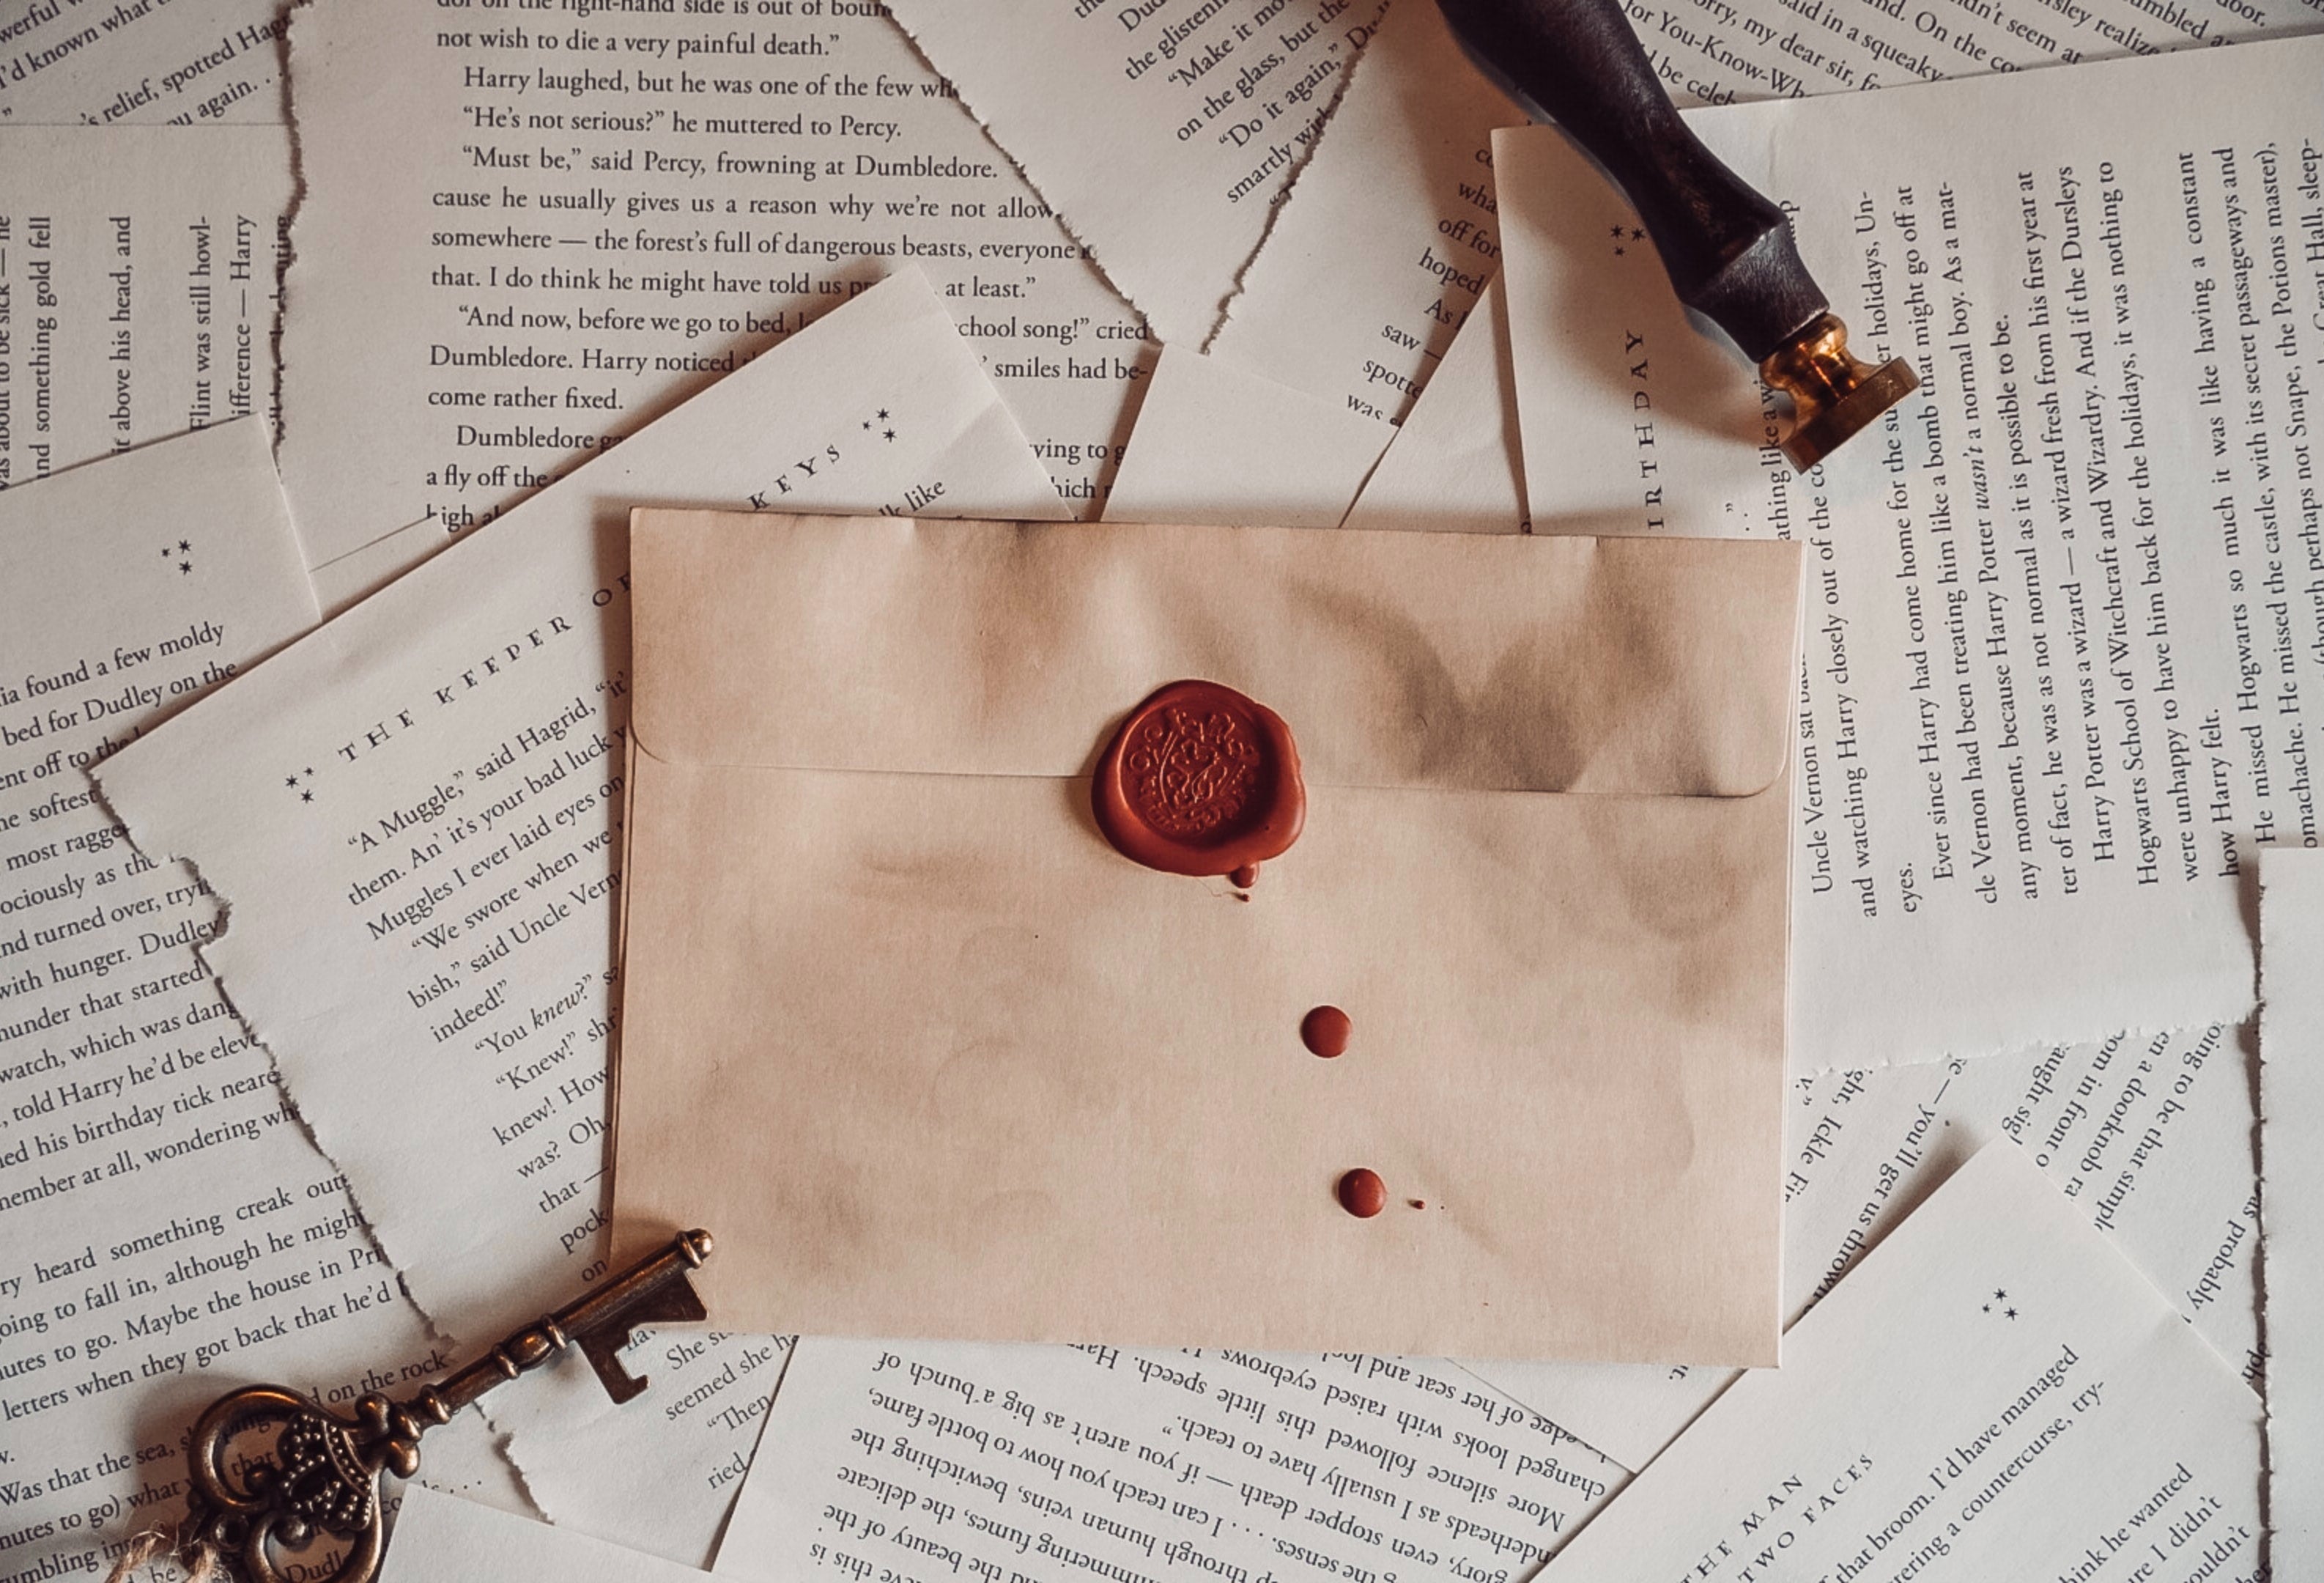 old letter with red wax seal, surrounded by harry potter pages,a brass key and wax stamp